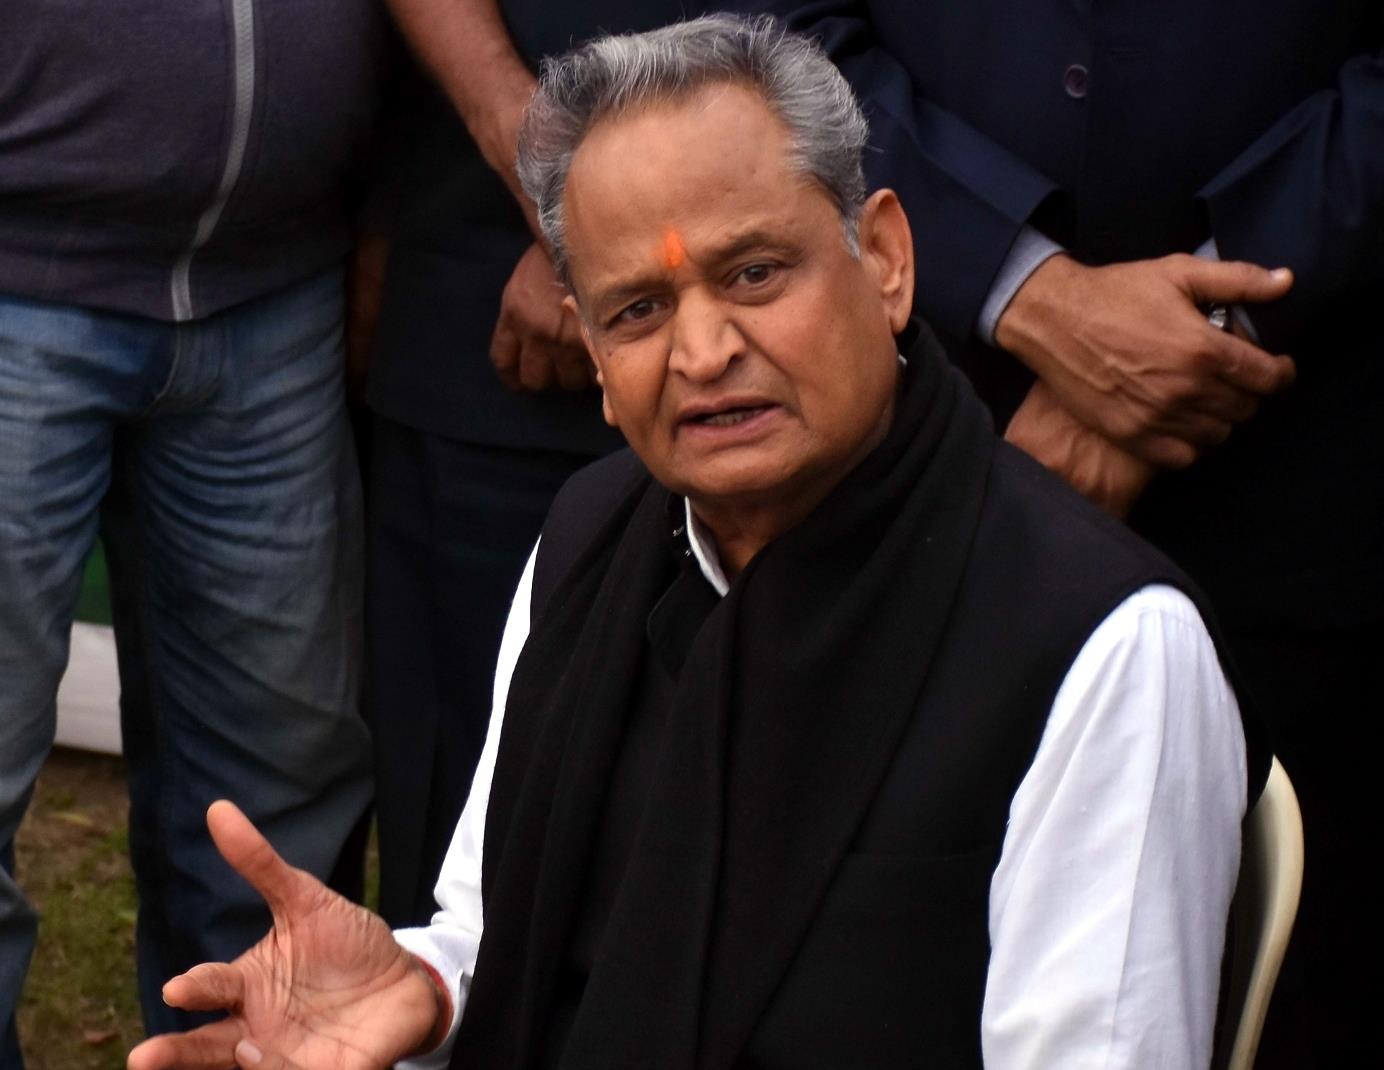  Gehlot Throws Mike At Barmer Dist Collector After It Malfunctions 